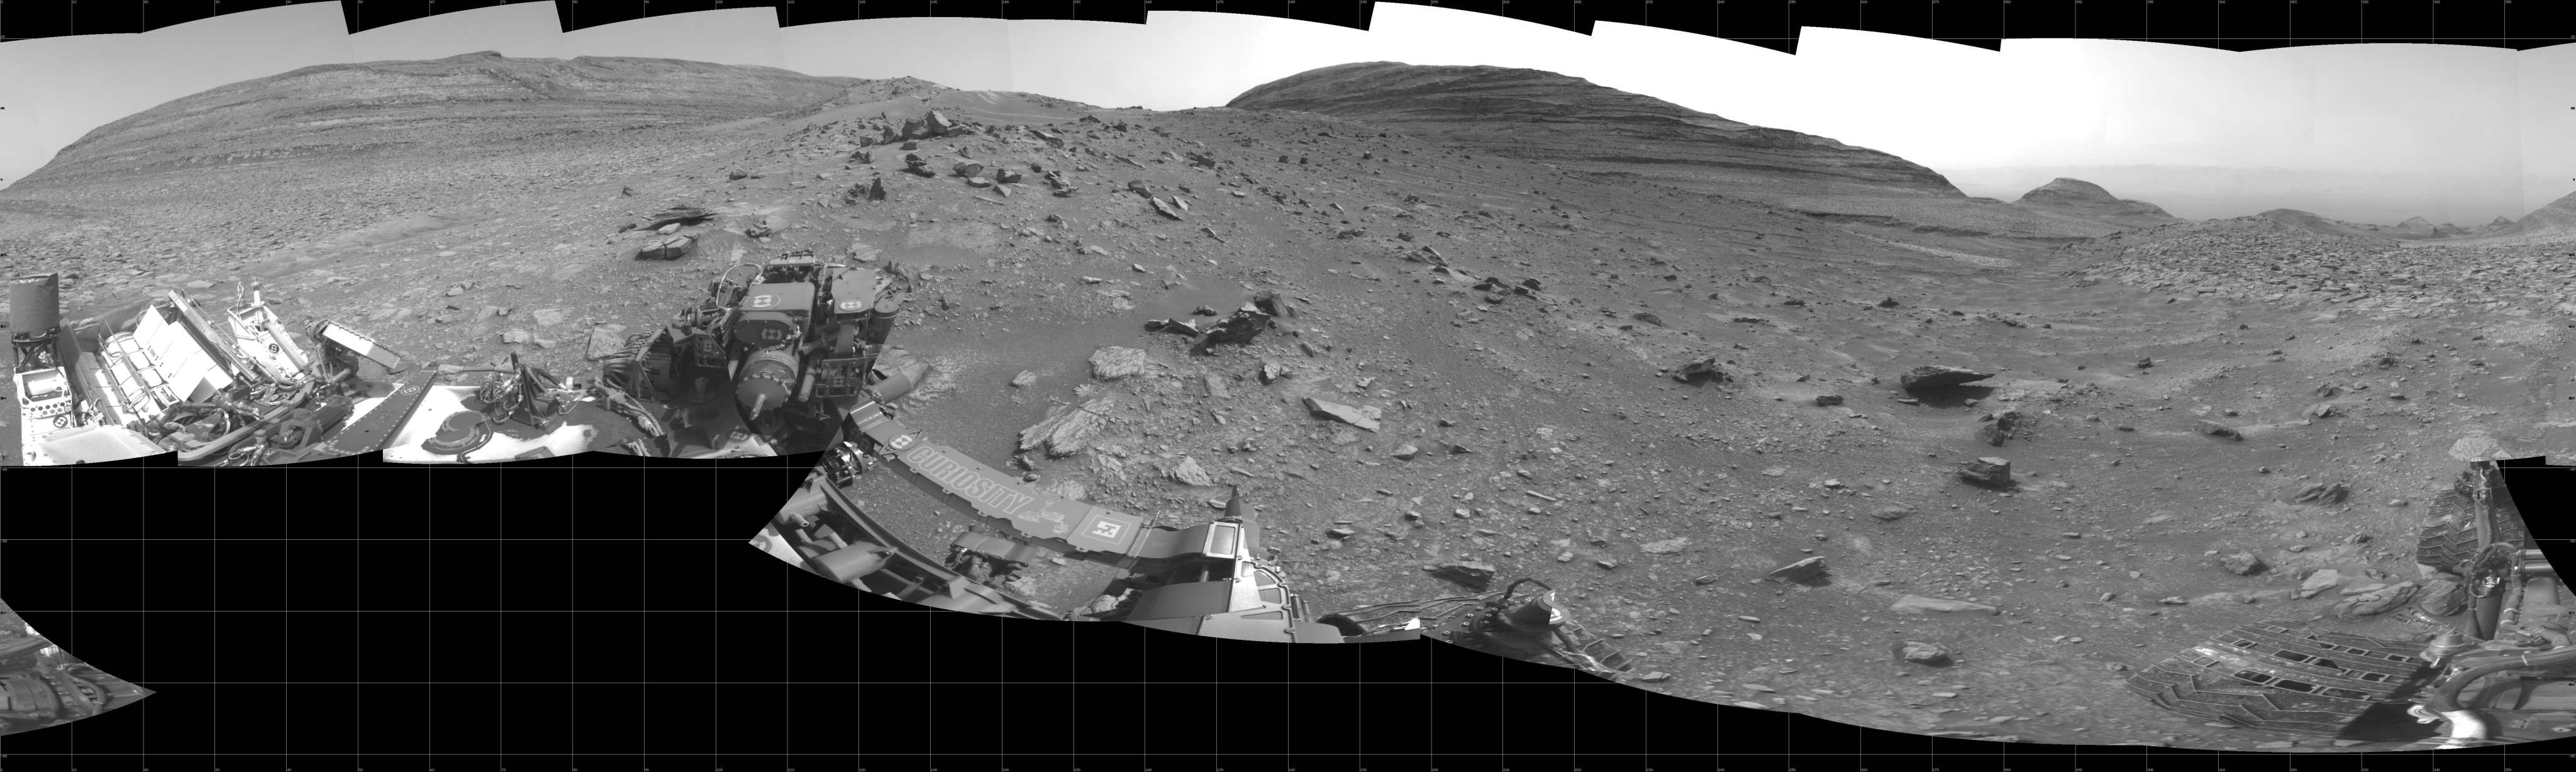 Curiosity took the images on May 23, 2024, Sol 4193 of the Mars Science Laboratory mission at drive 2054, site number 107. The local mean solar time for the image exposures was 2 PM.